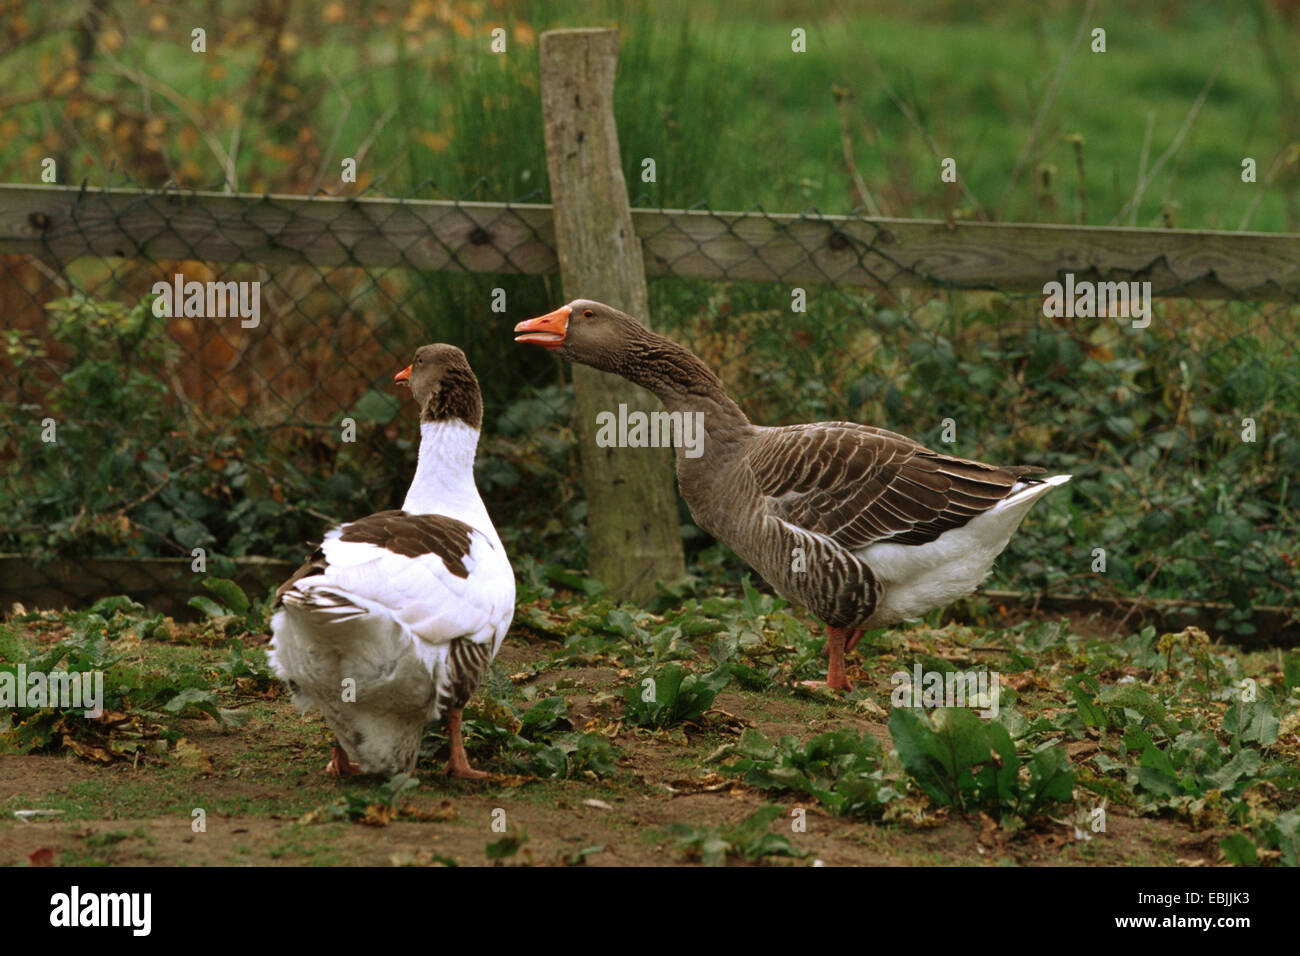 domestic goose (Anser anser f. domestica), a spotted and a grey Pomeranian Goose in a garden Stock Photo